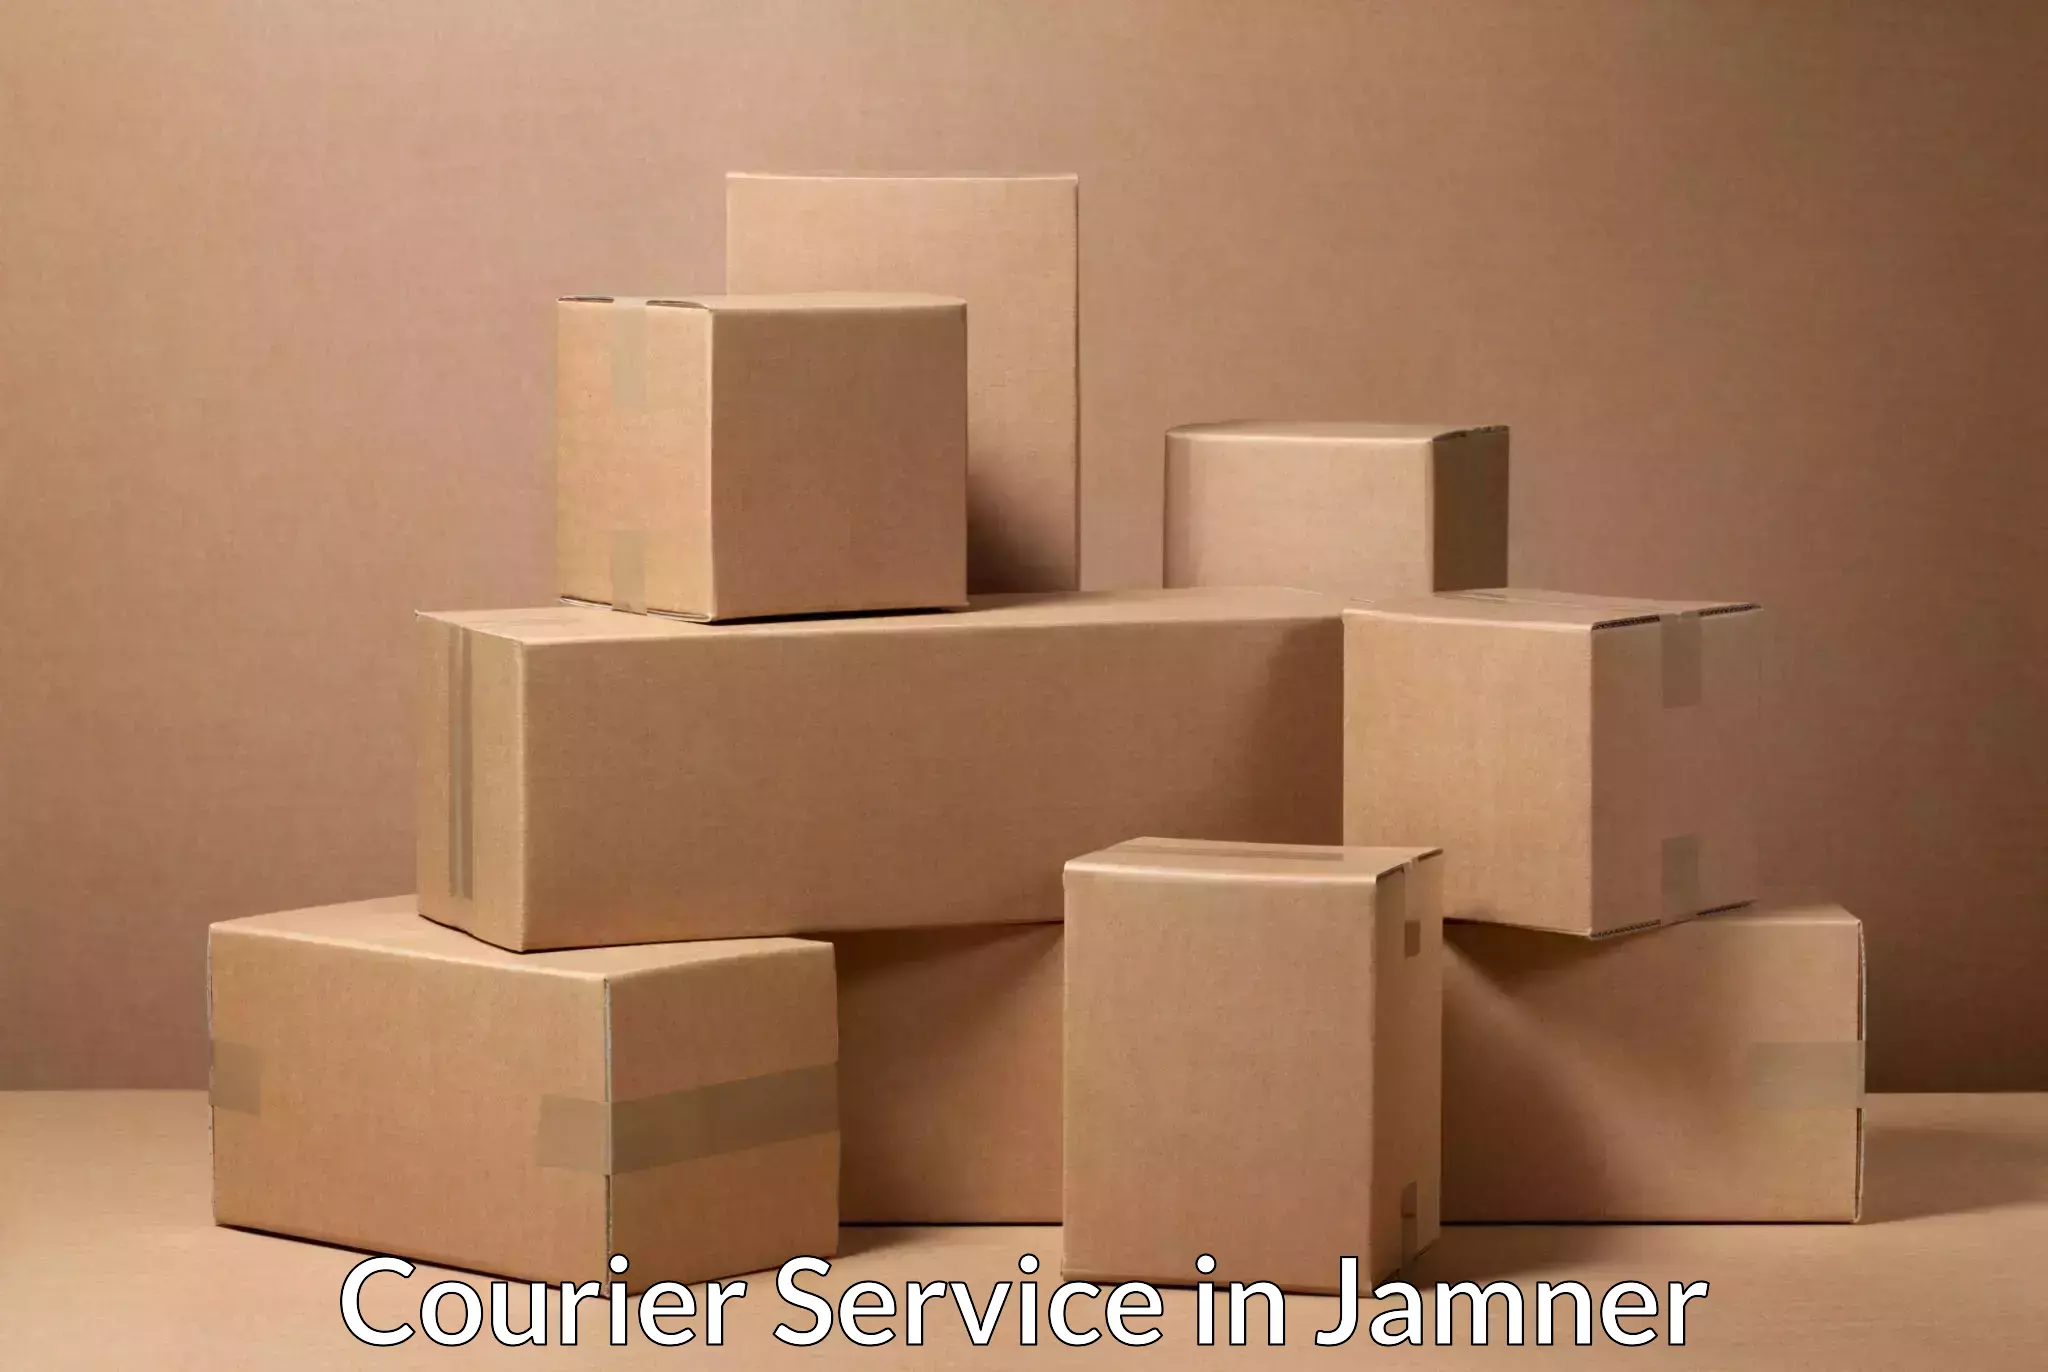 High-speed delivery in Jamner